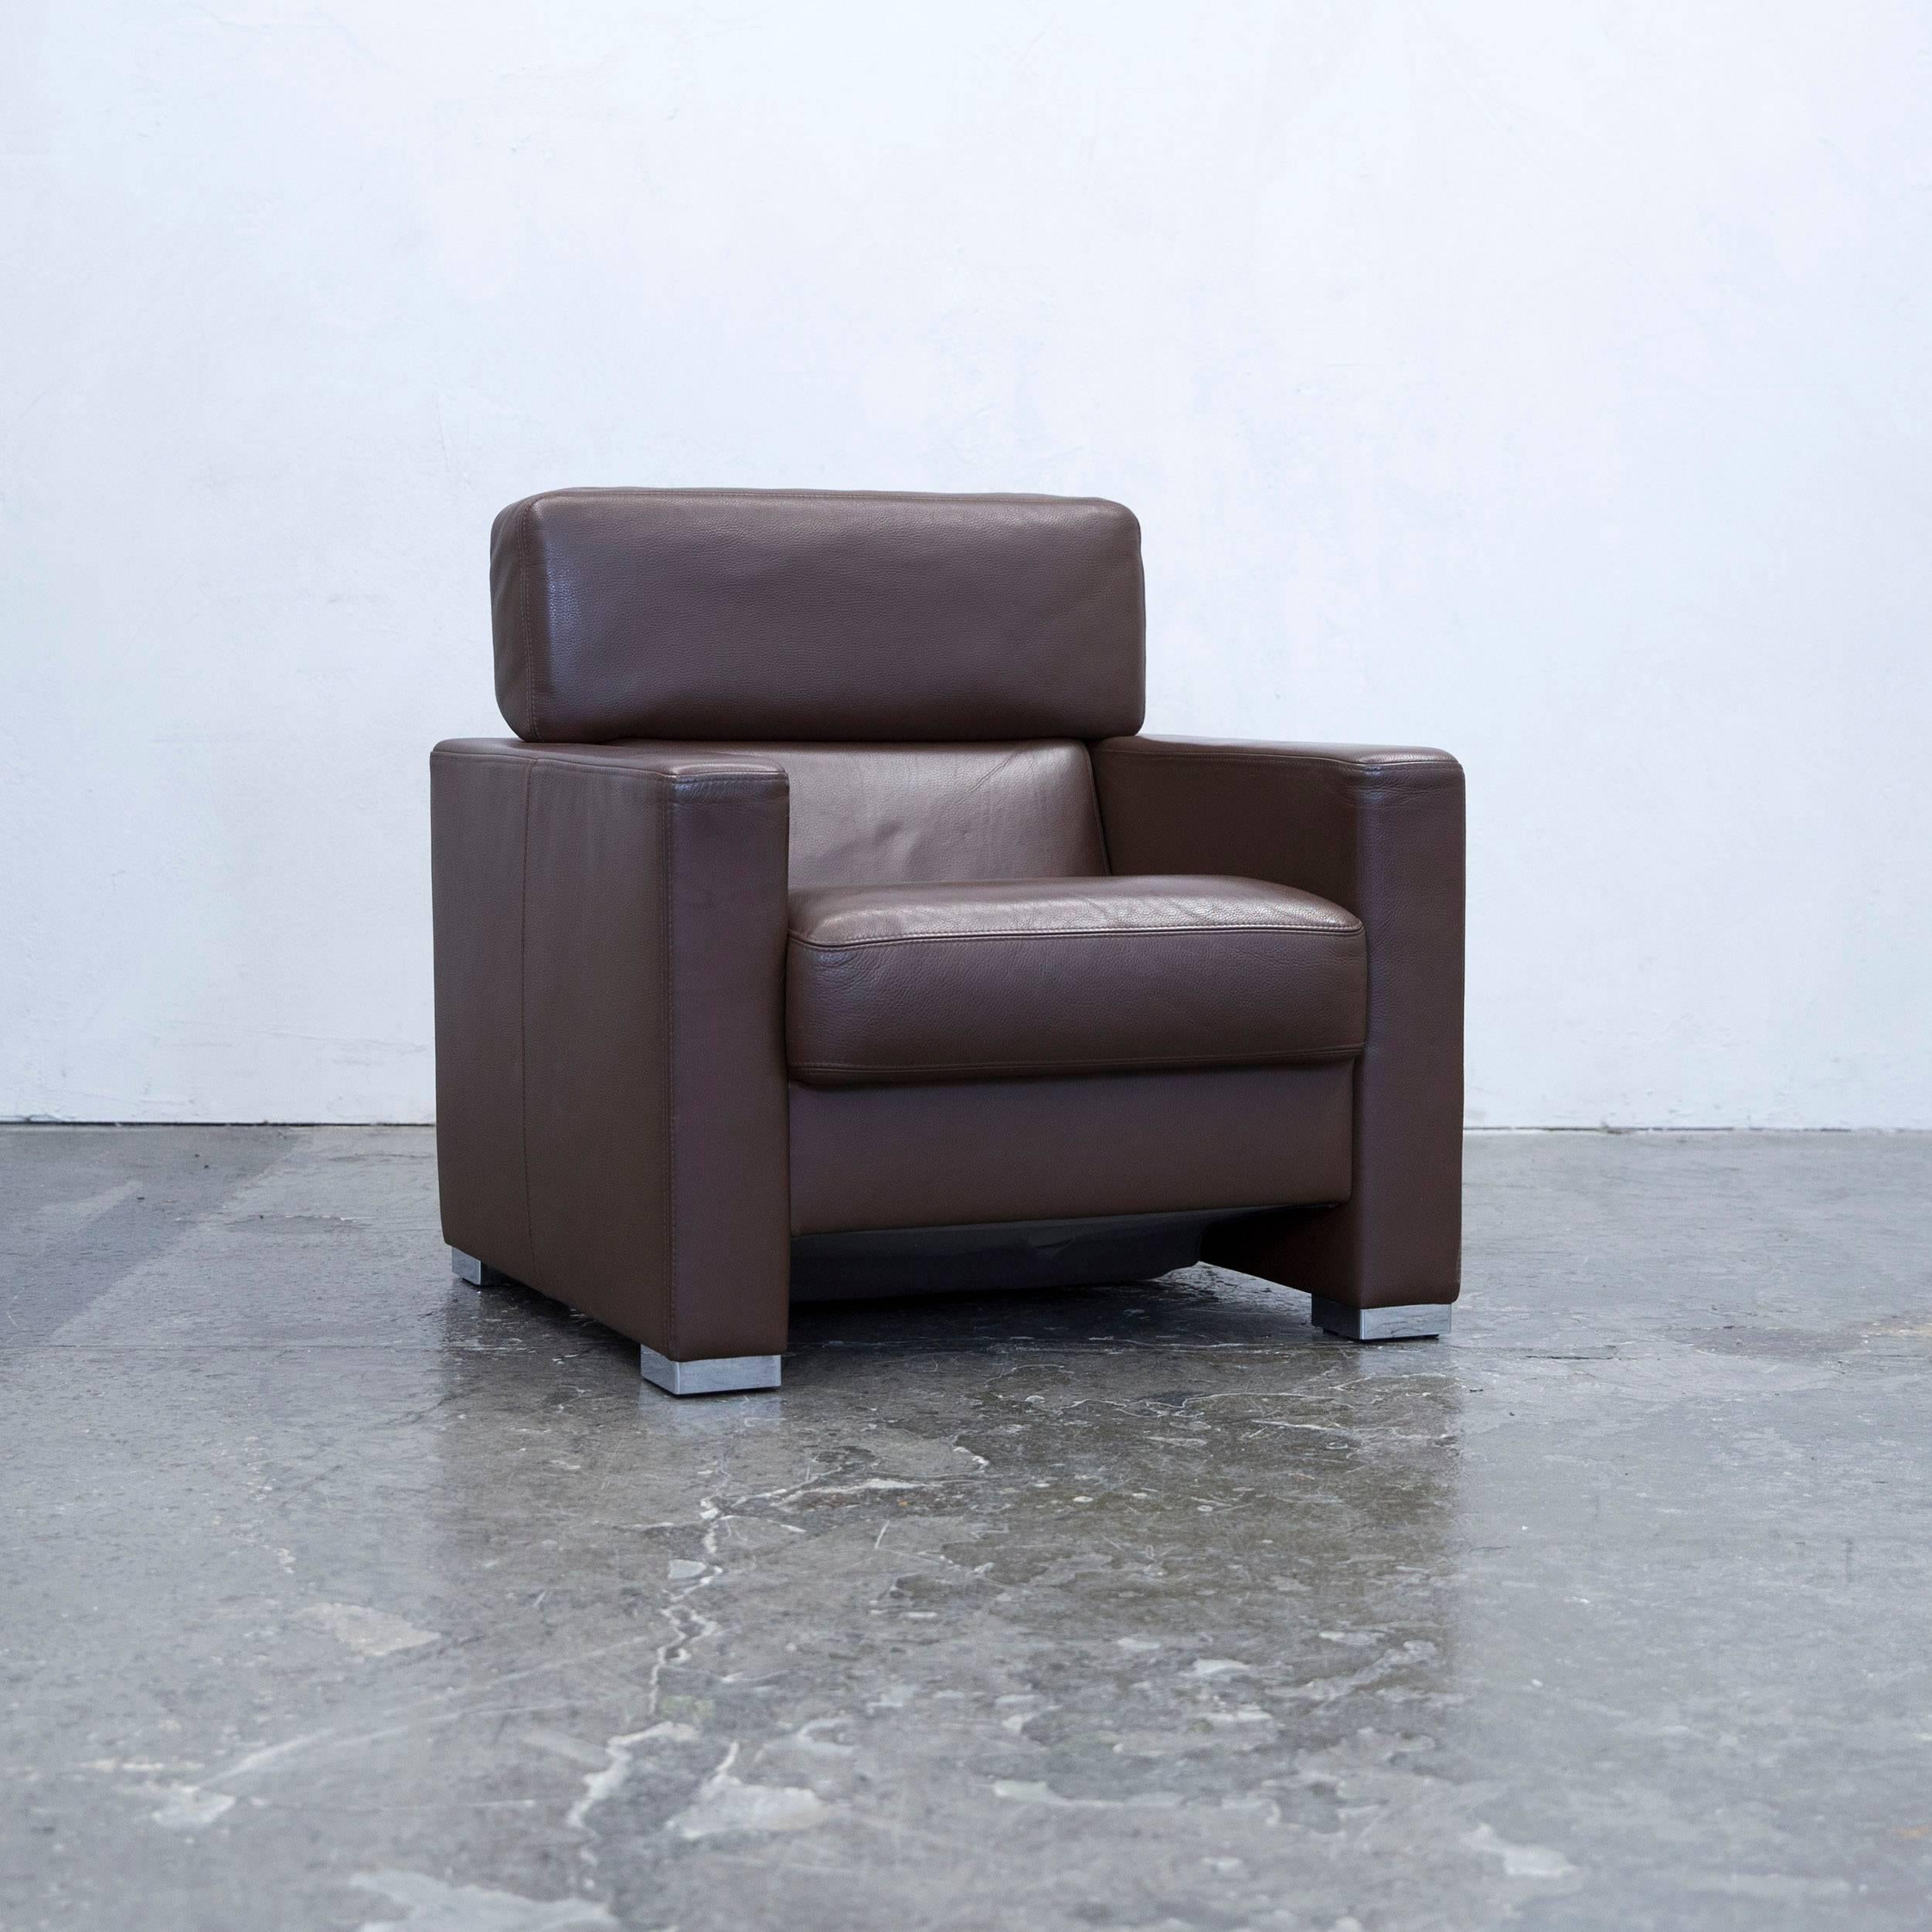 Brown colored original Brühl & Sippold designer leather chair in a minimalistic and modern design, with convenient functions, made for pure comfort and flexibility.